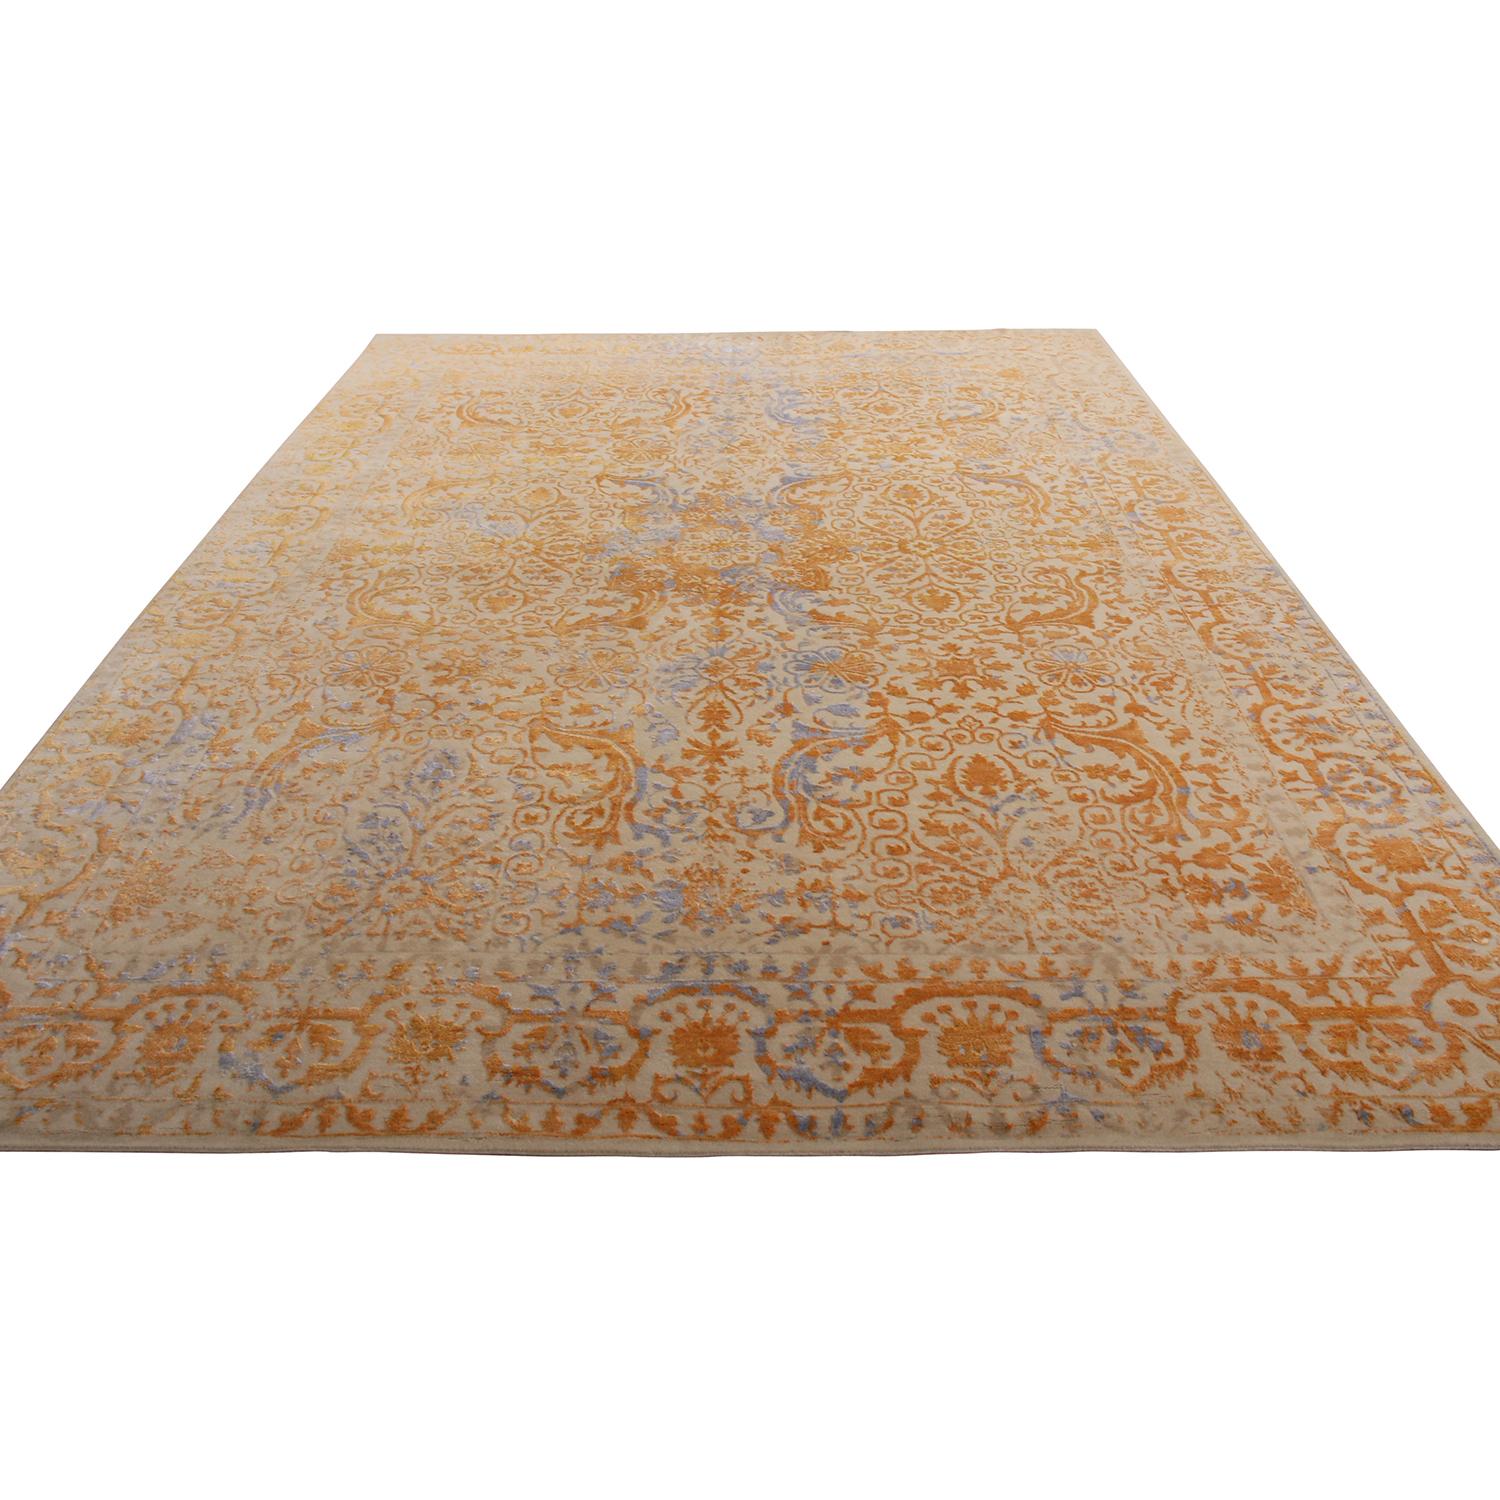 Hand knotted with a unique combination of wool, natural silk and exotic yarn, Rug & Kilim’s latest addition to our custom rug collection enjoys a regal, inviting play of gold and silver-blue colorways in this classically inspired design. Accented by